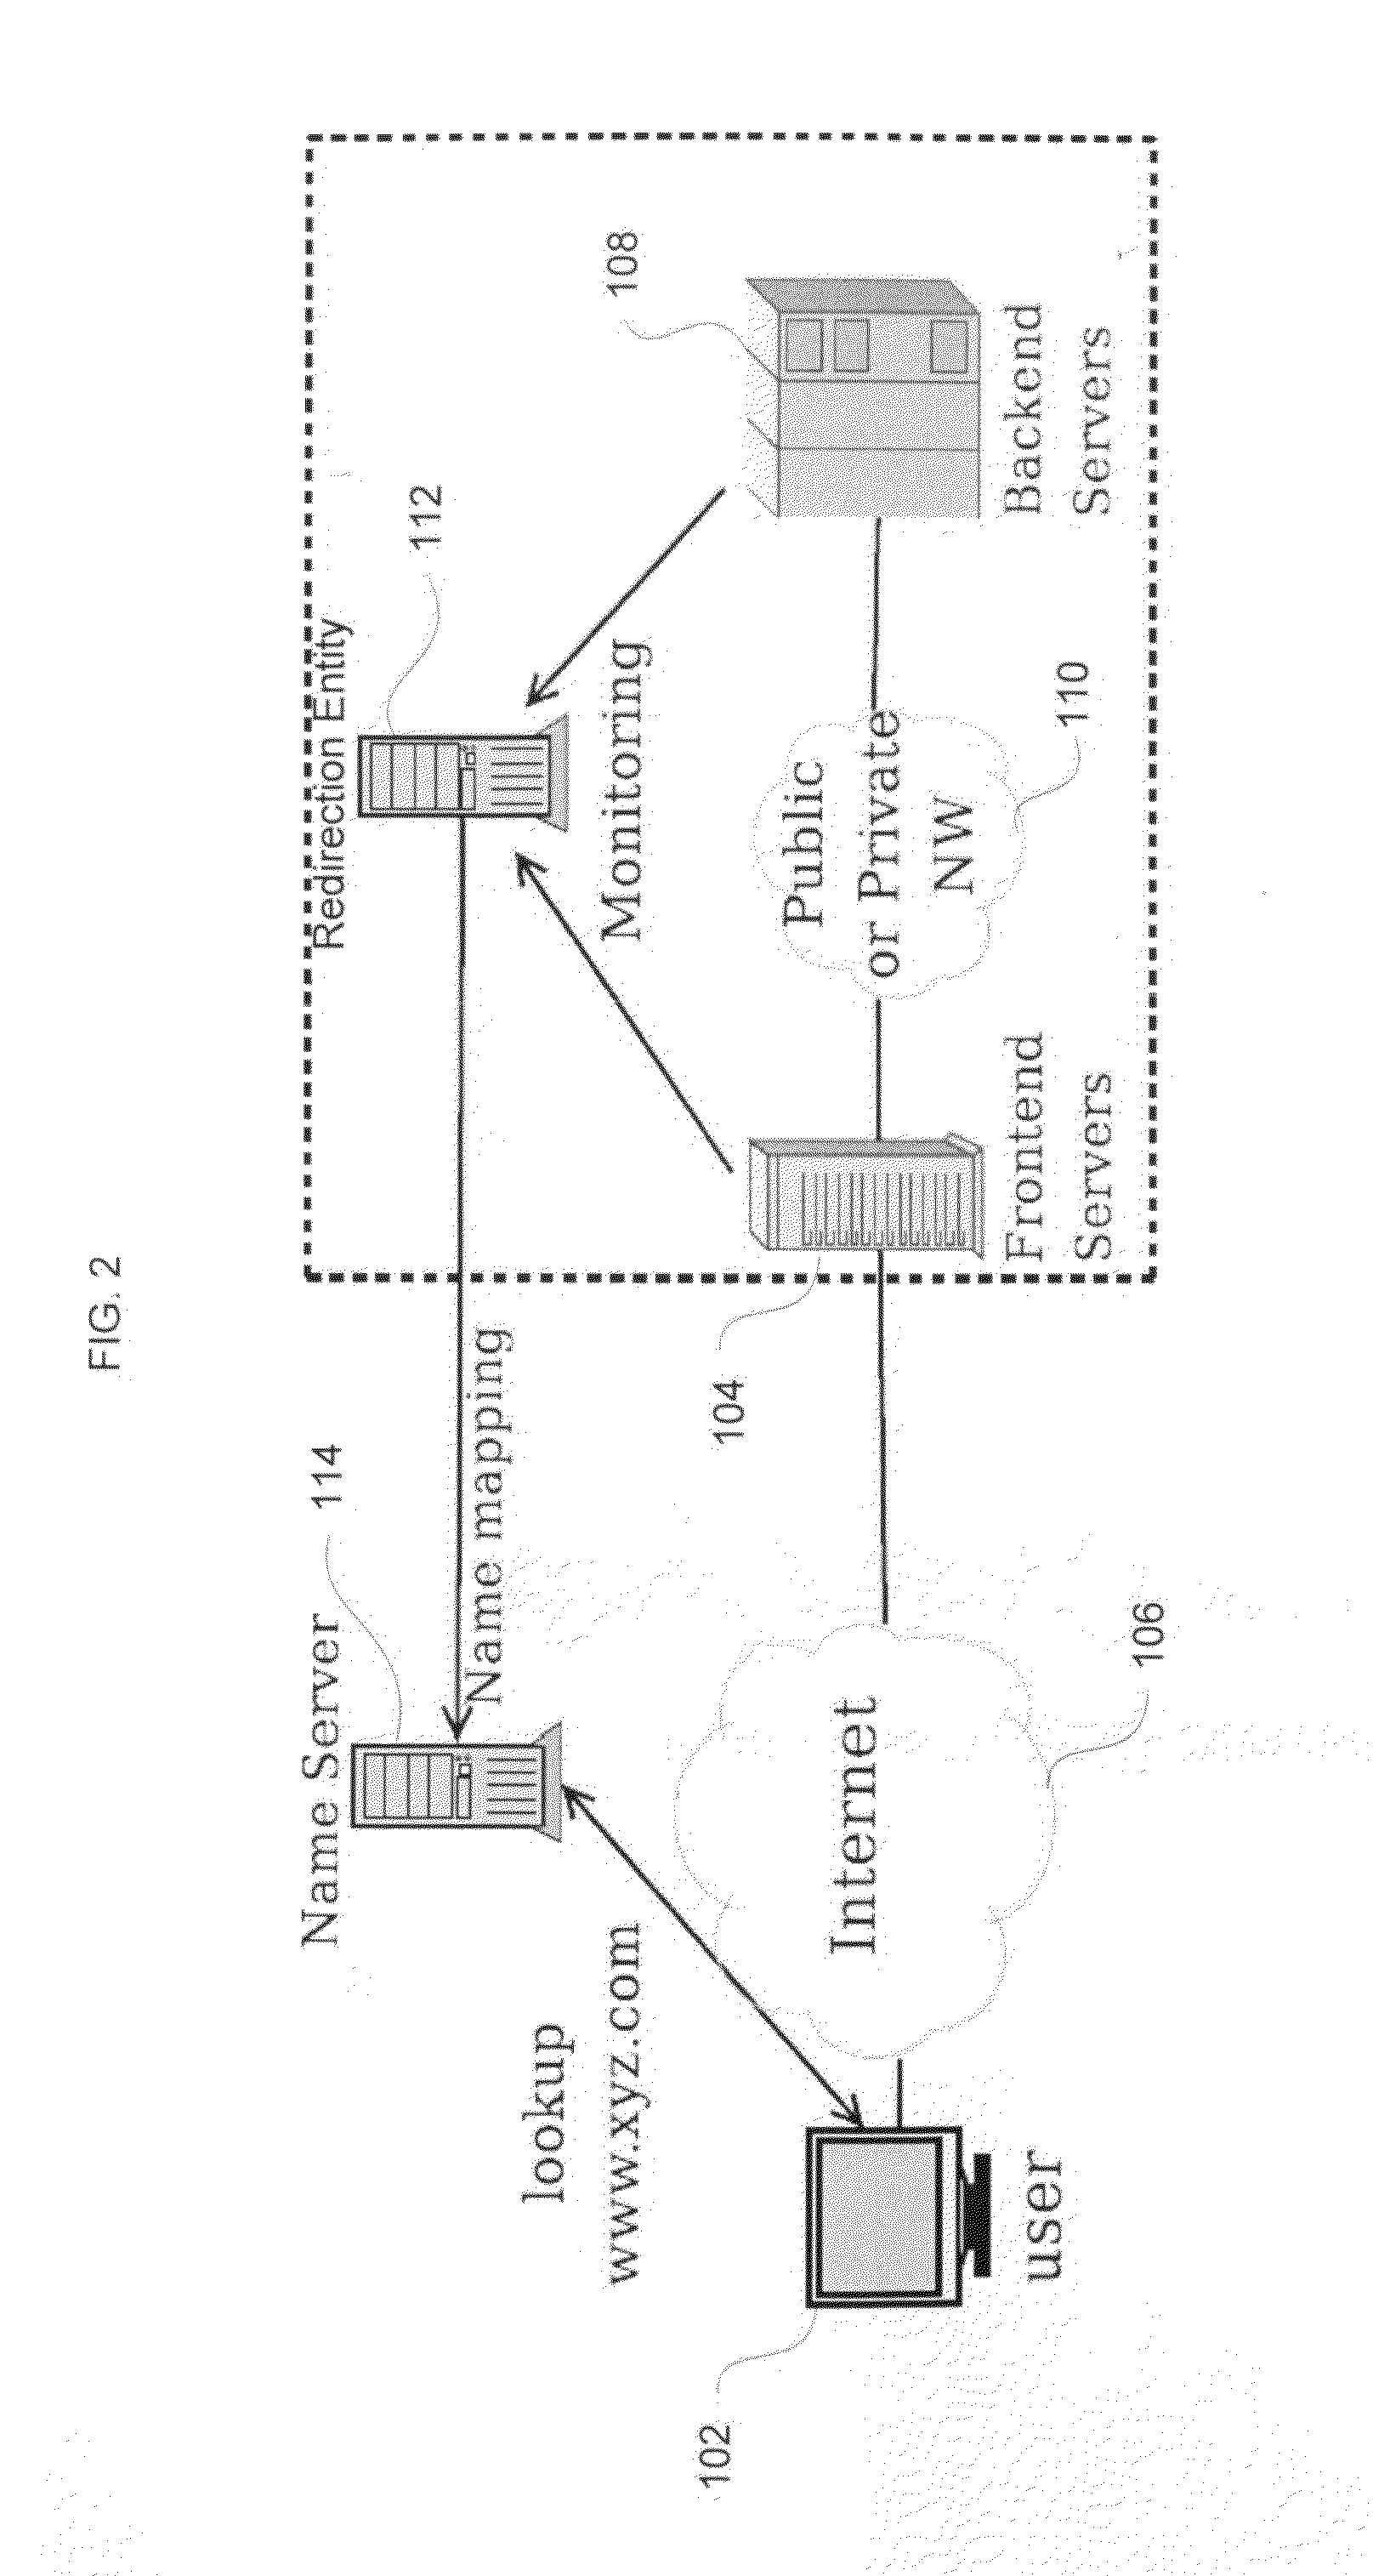 Methods and apparatus for predicting impact of proposed changes and implementations in distributed networks